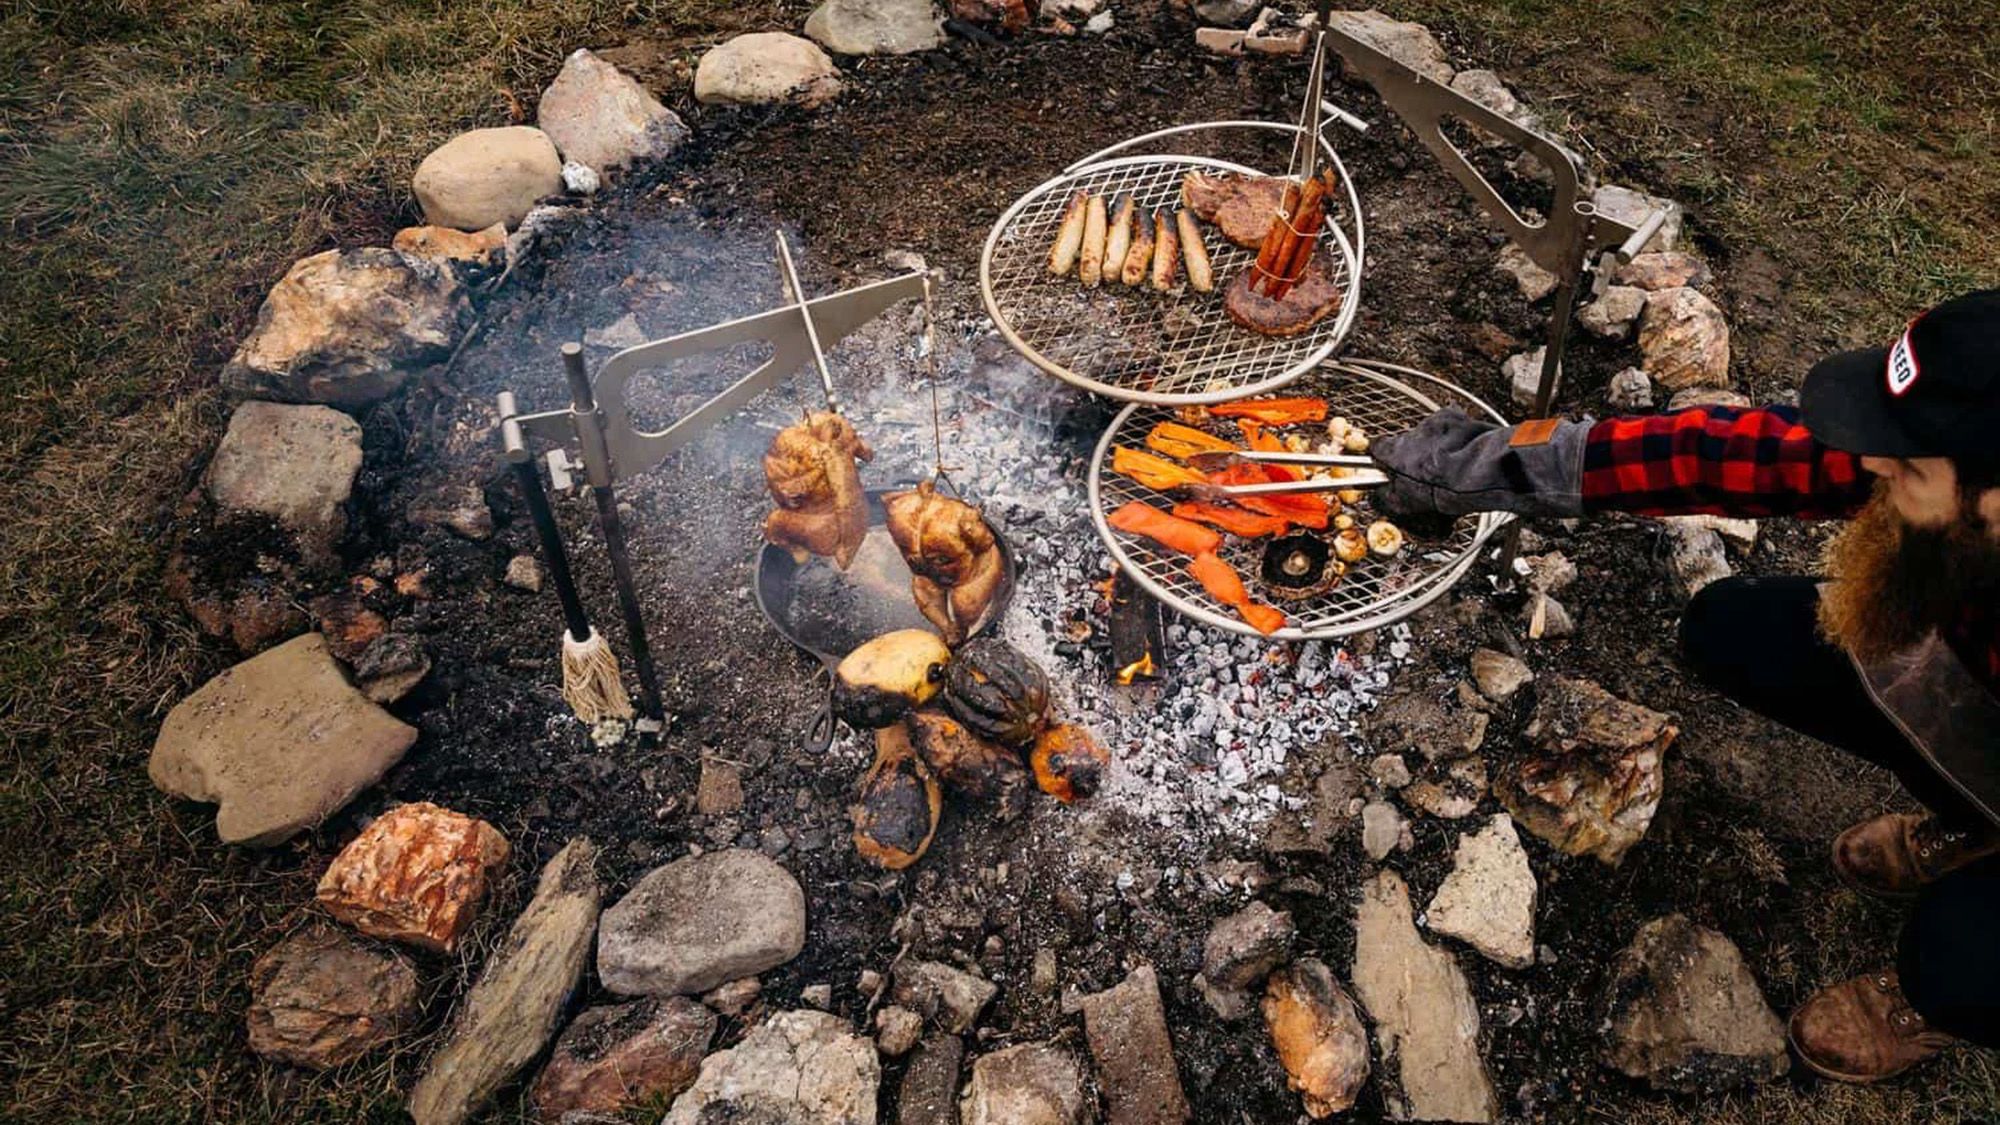 New to camp fire Dutch oven cooking - help me understand heat